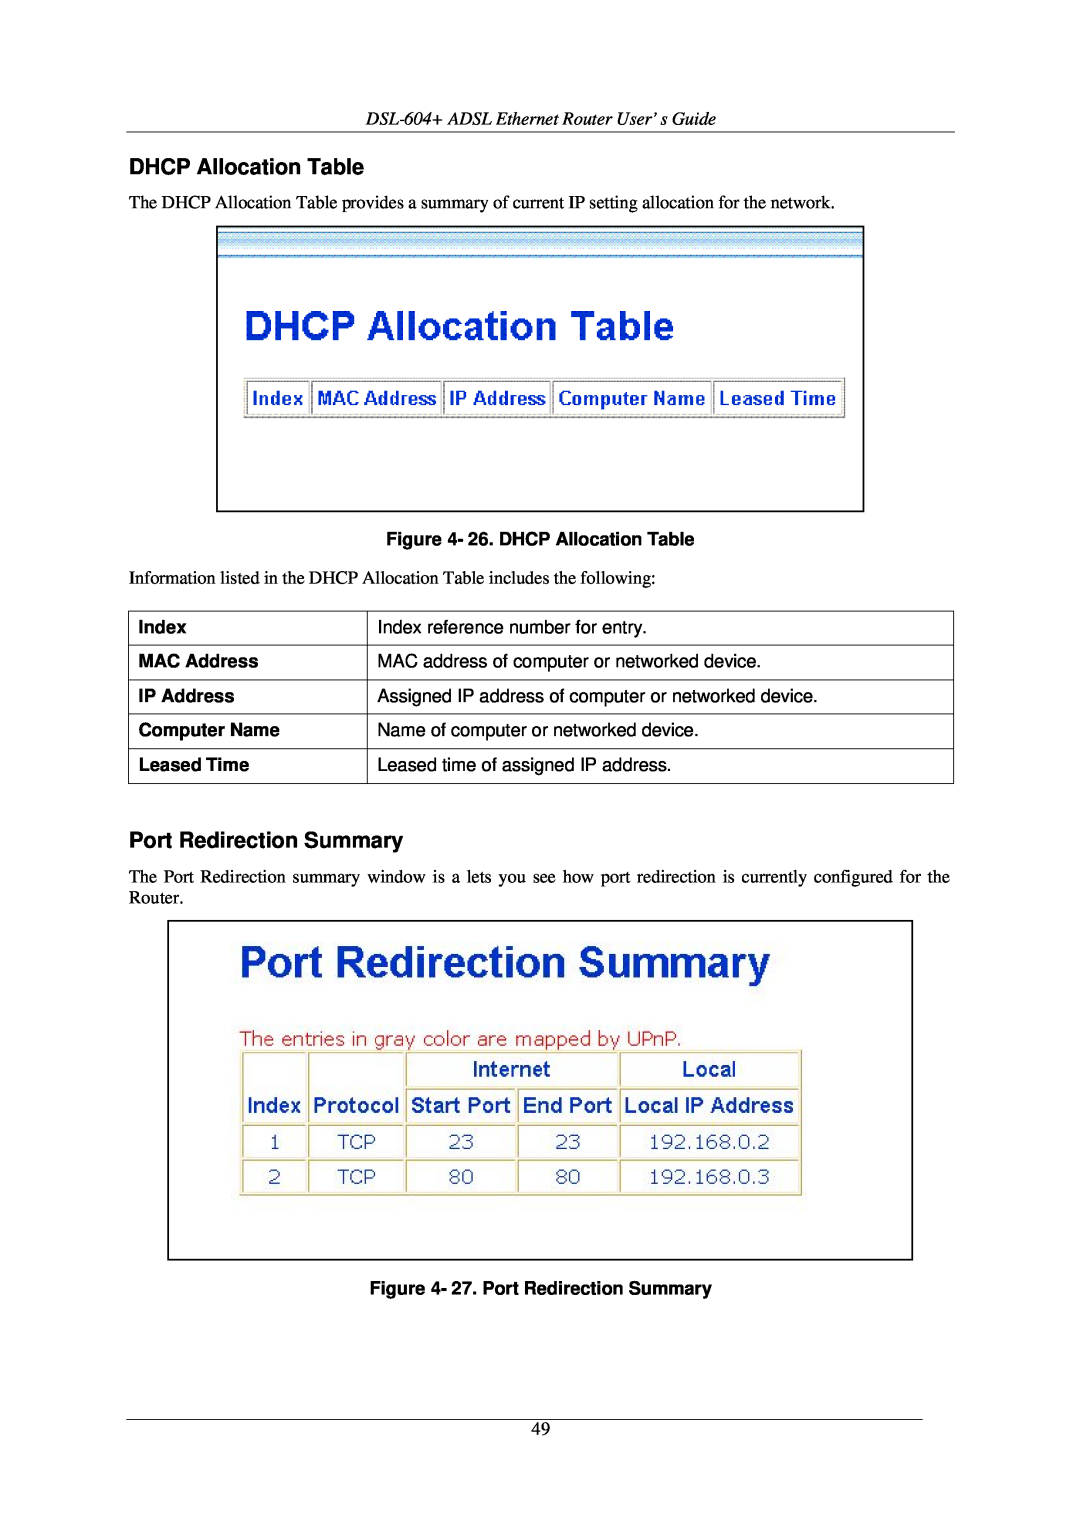 D-Link manual DHCP Allocation Table, Port Redirection Summary, DSL-604+ ADSL Ethernet Router User’s Guide 